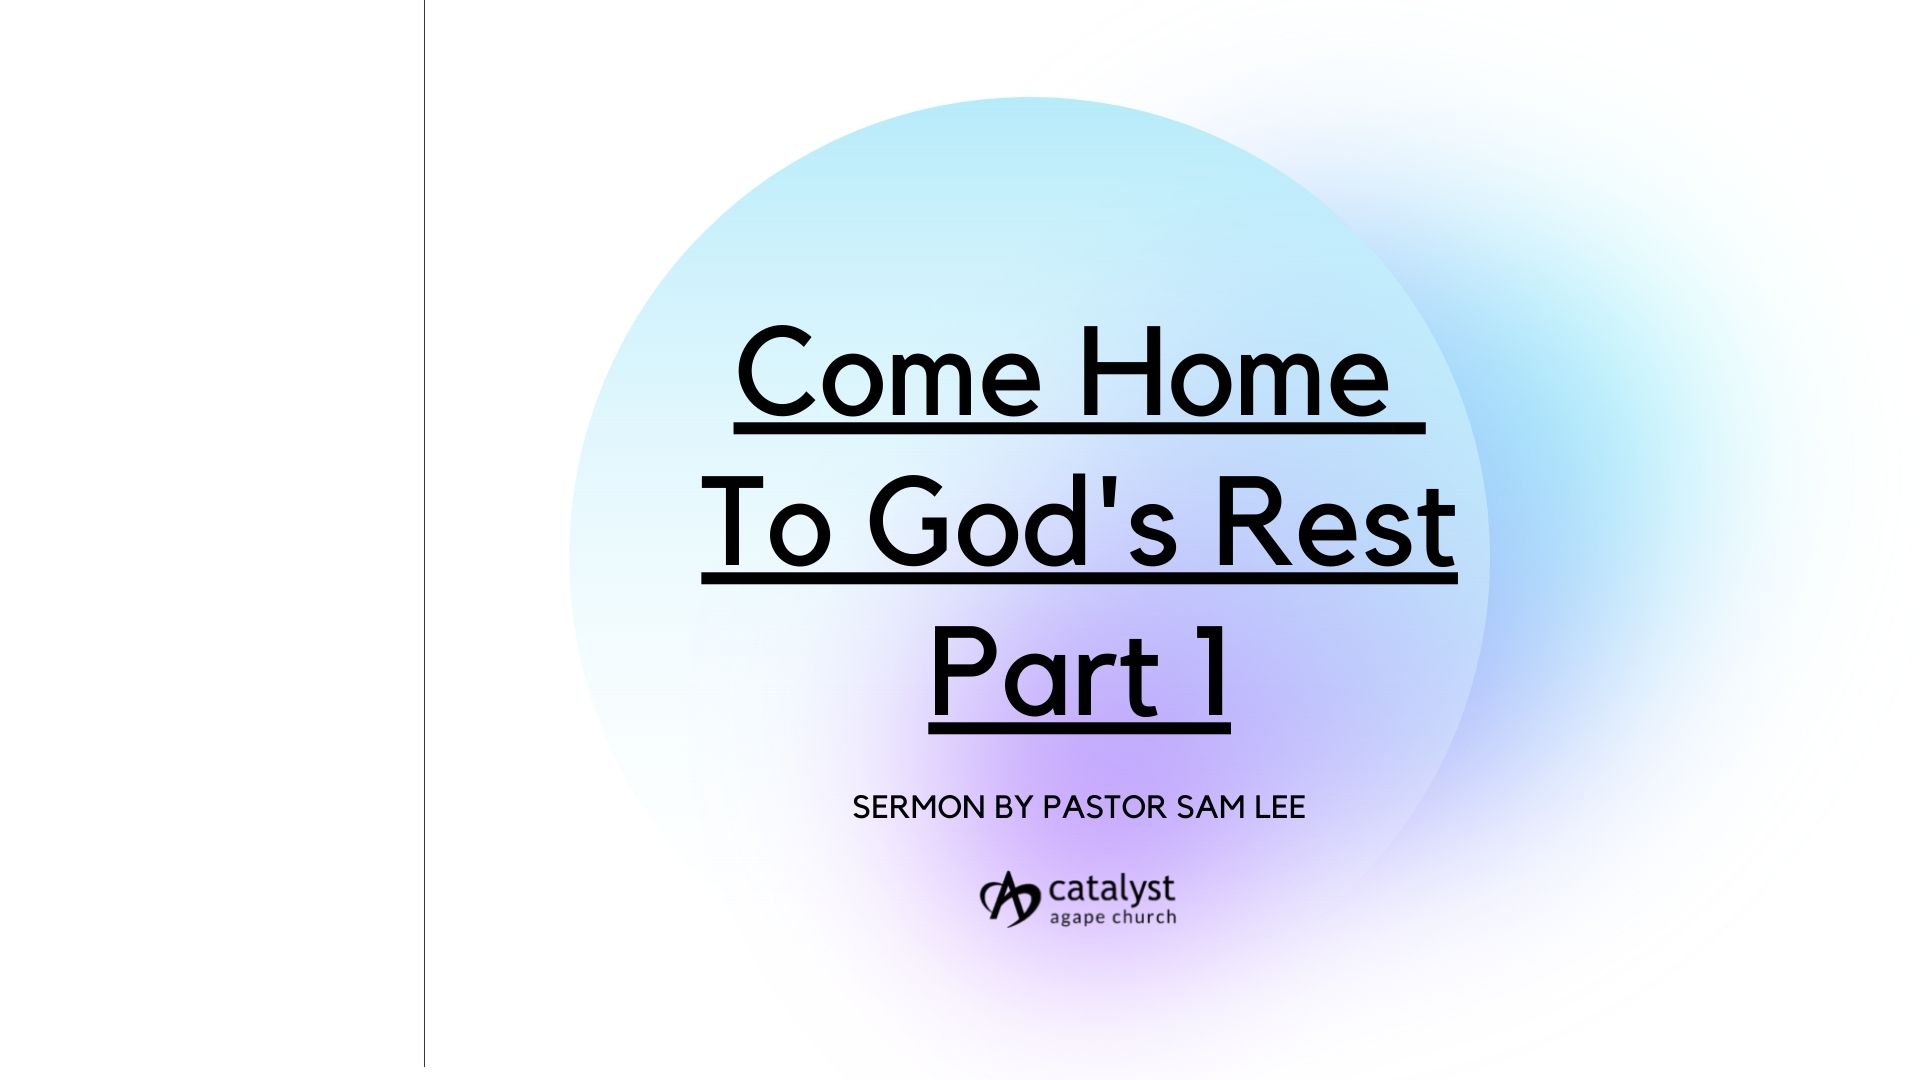 Come Home To God's Rest - Part 1